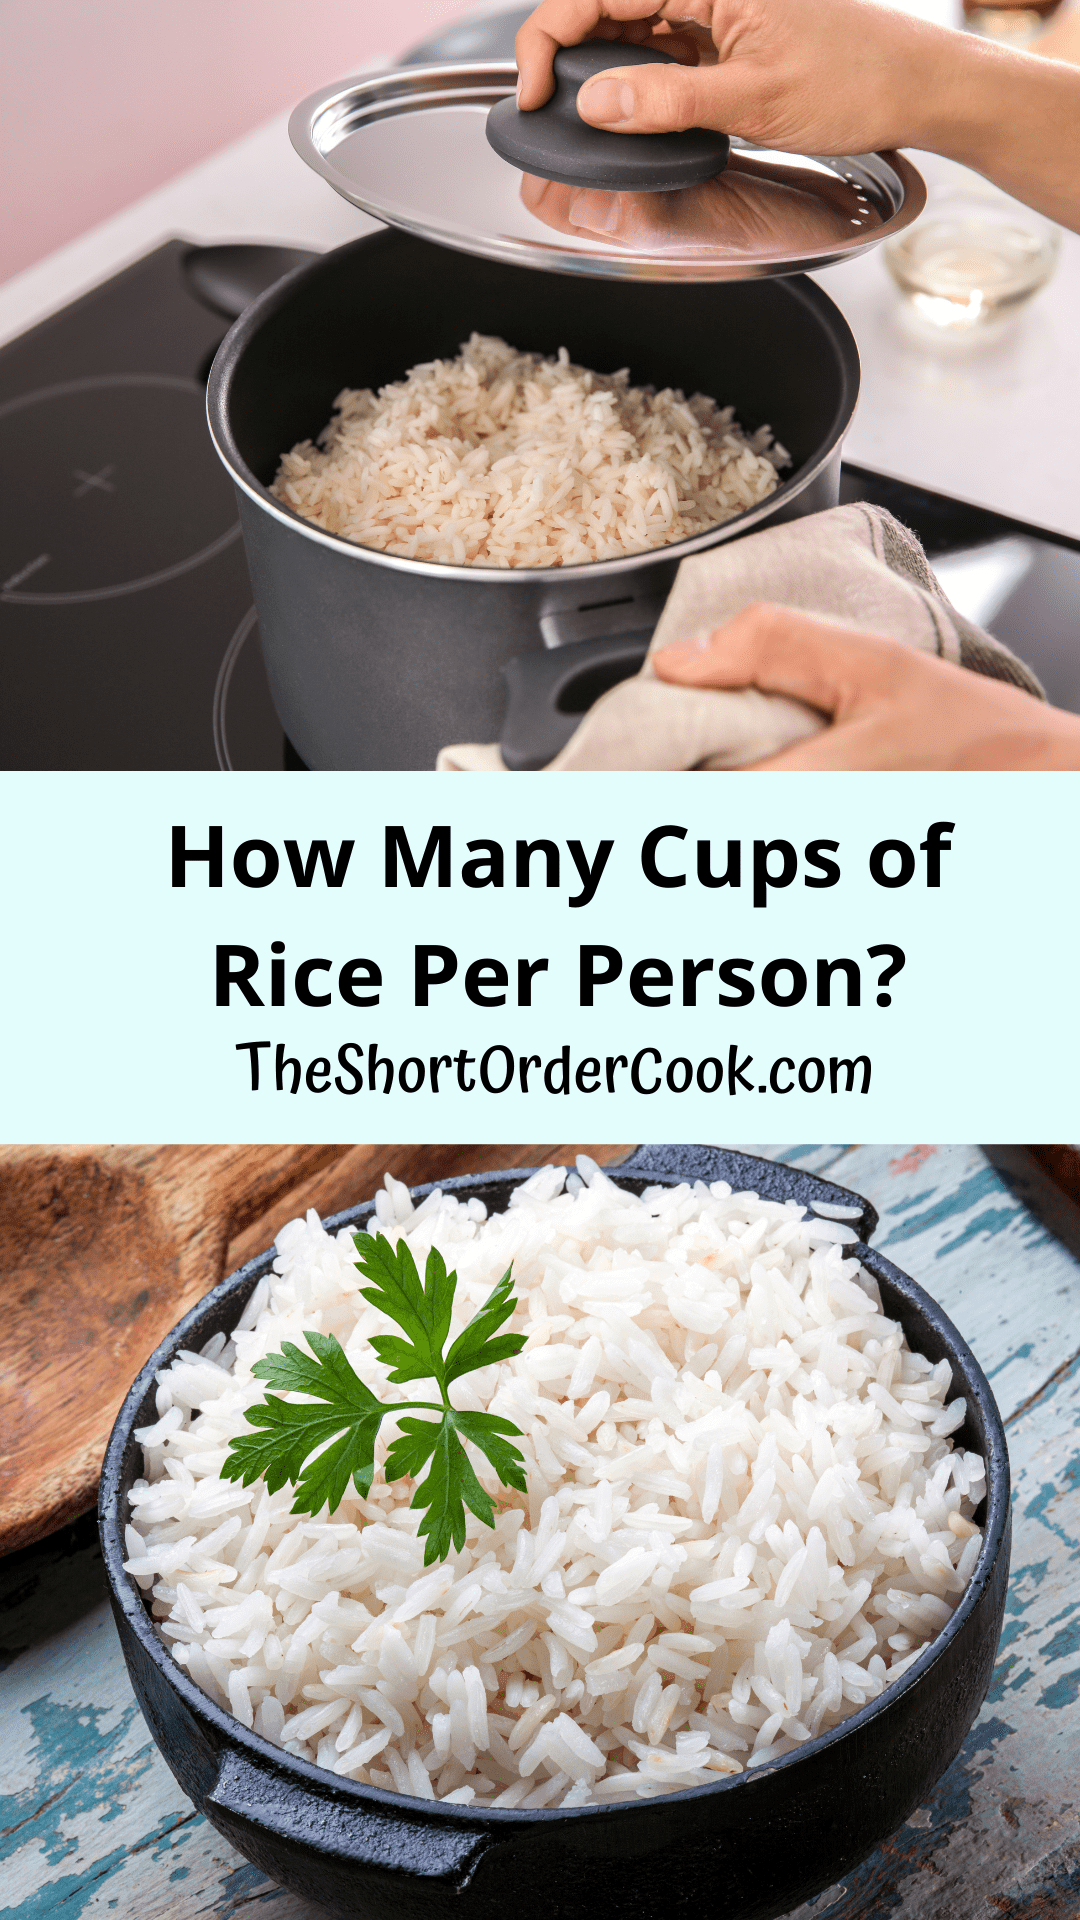 How Much Does 1 Cup of Dry Rice Make?